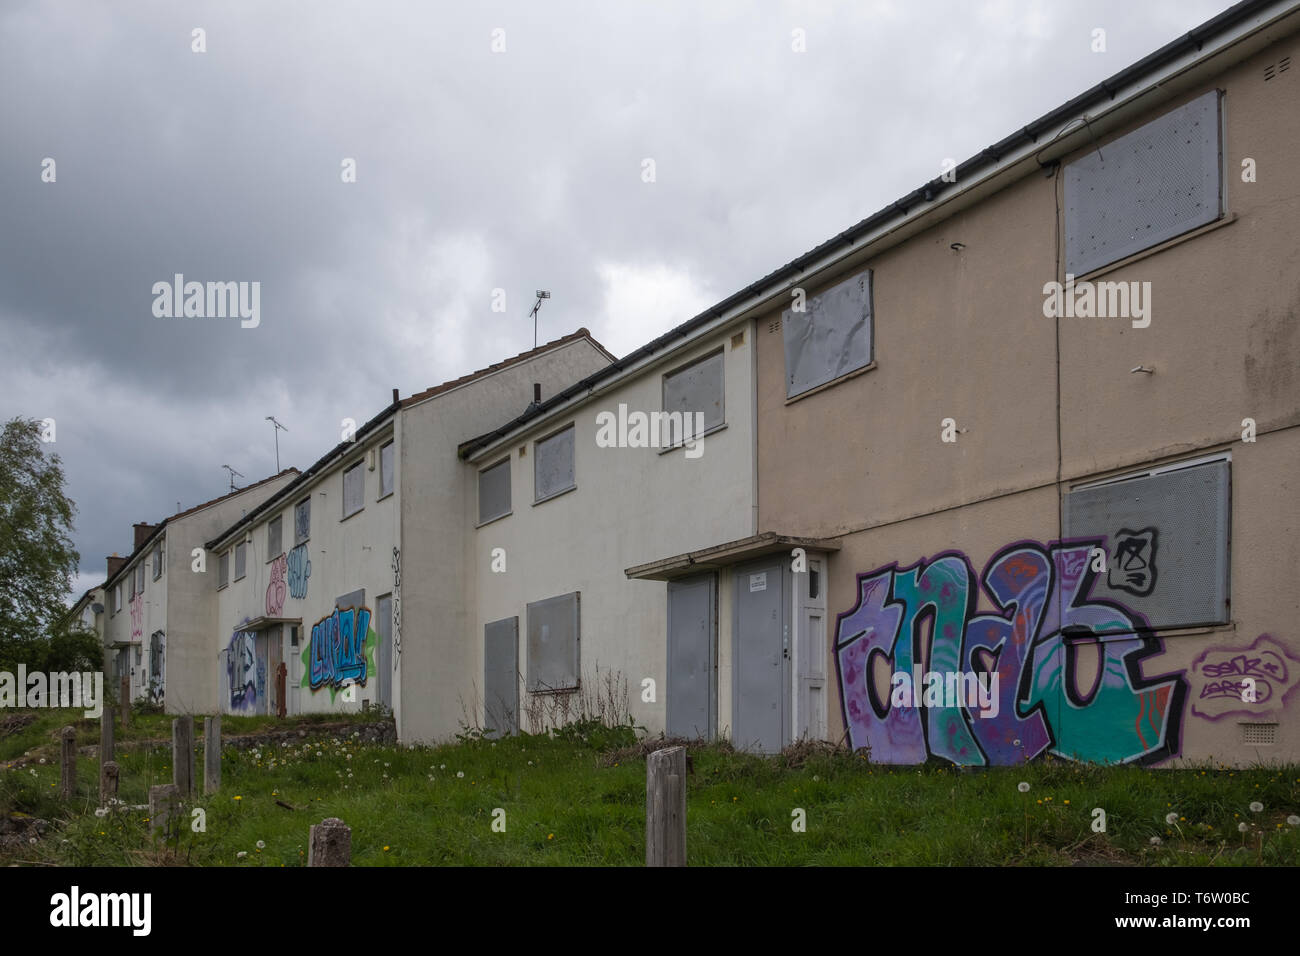 Boarded-up and defaced derelict council houses in Gildas Avenue in the Kings Norton suburb of Birmingham, UK Stock Photo